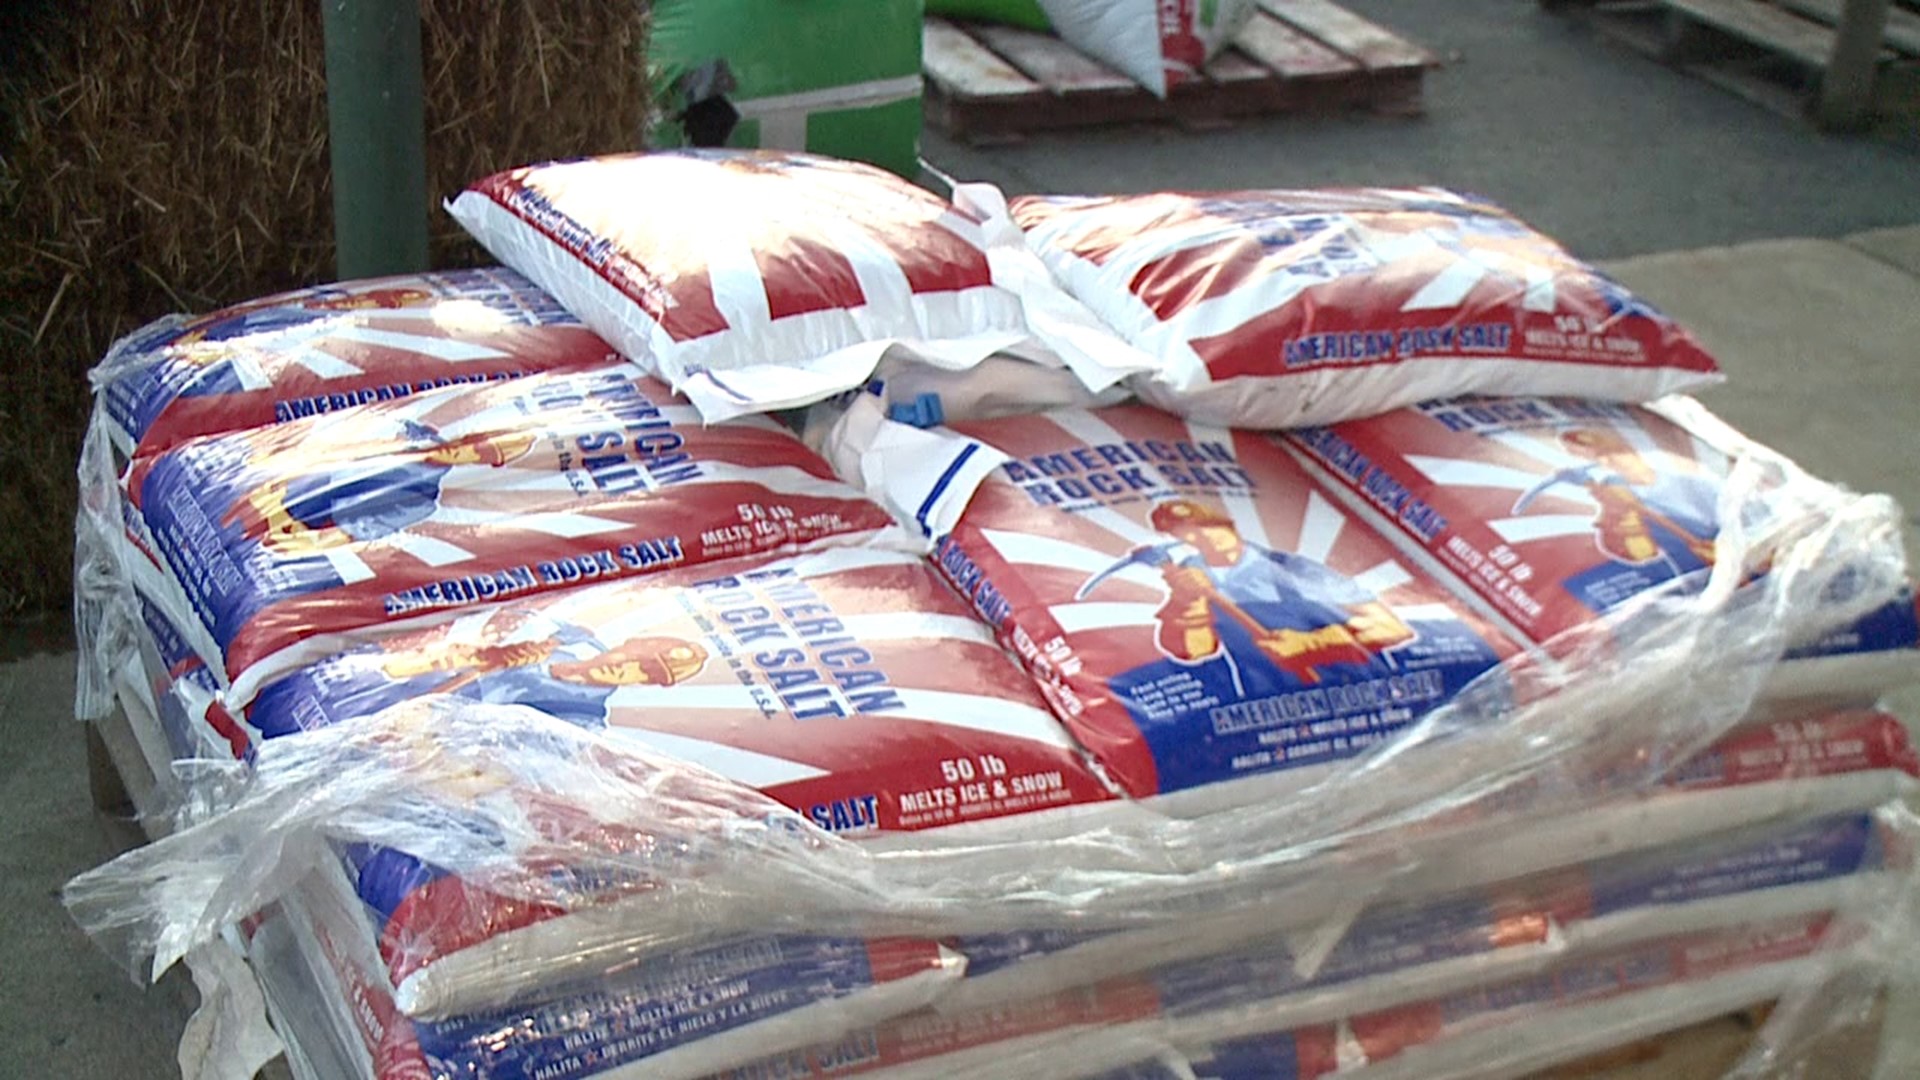 Folks stocked up on essentials ahead of the wintry weather expected Sunday morning.